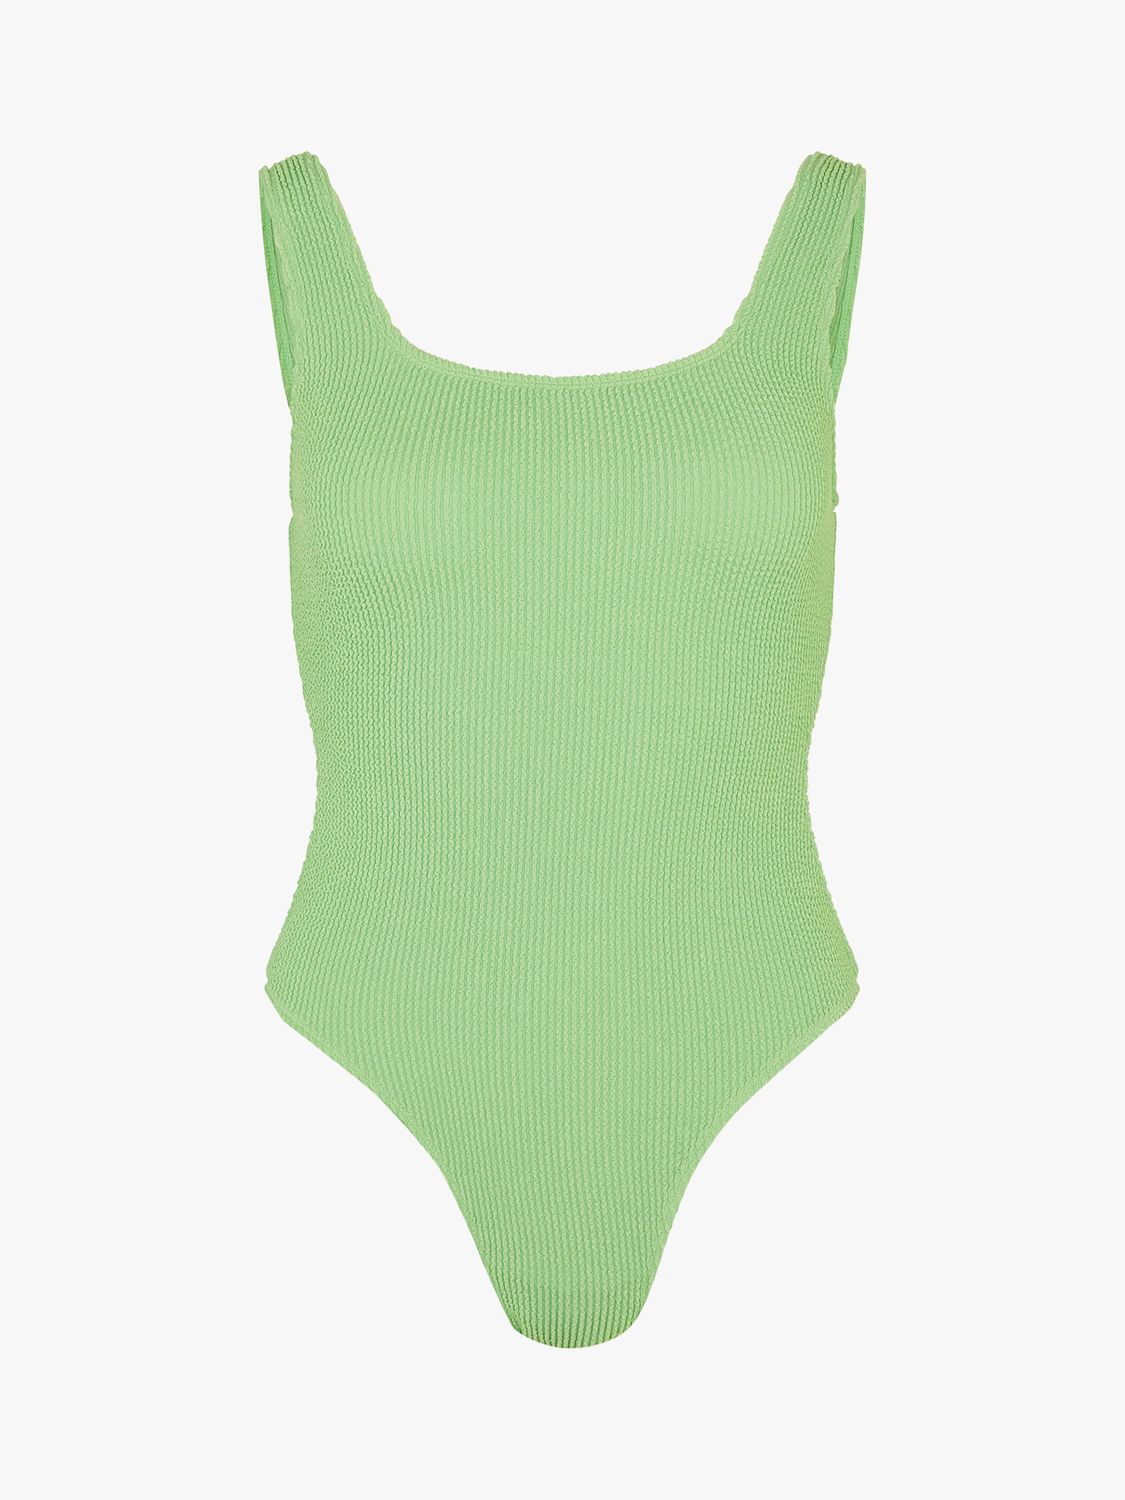 Accessorize Crinkle Fabric Swimsuit, Light Green at John Lewis & Partners